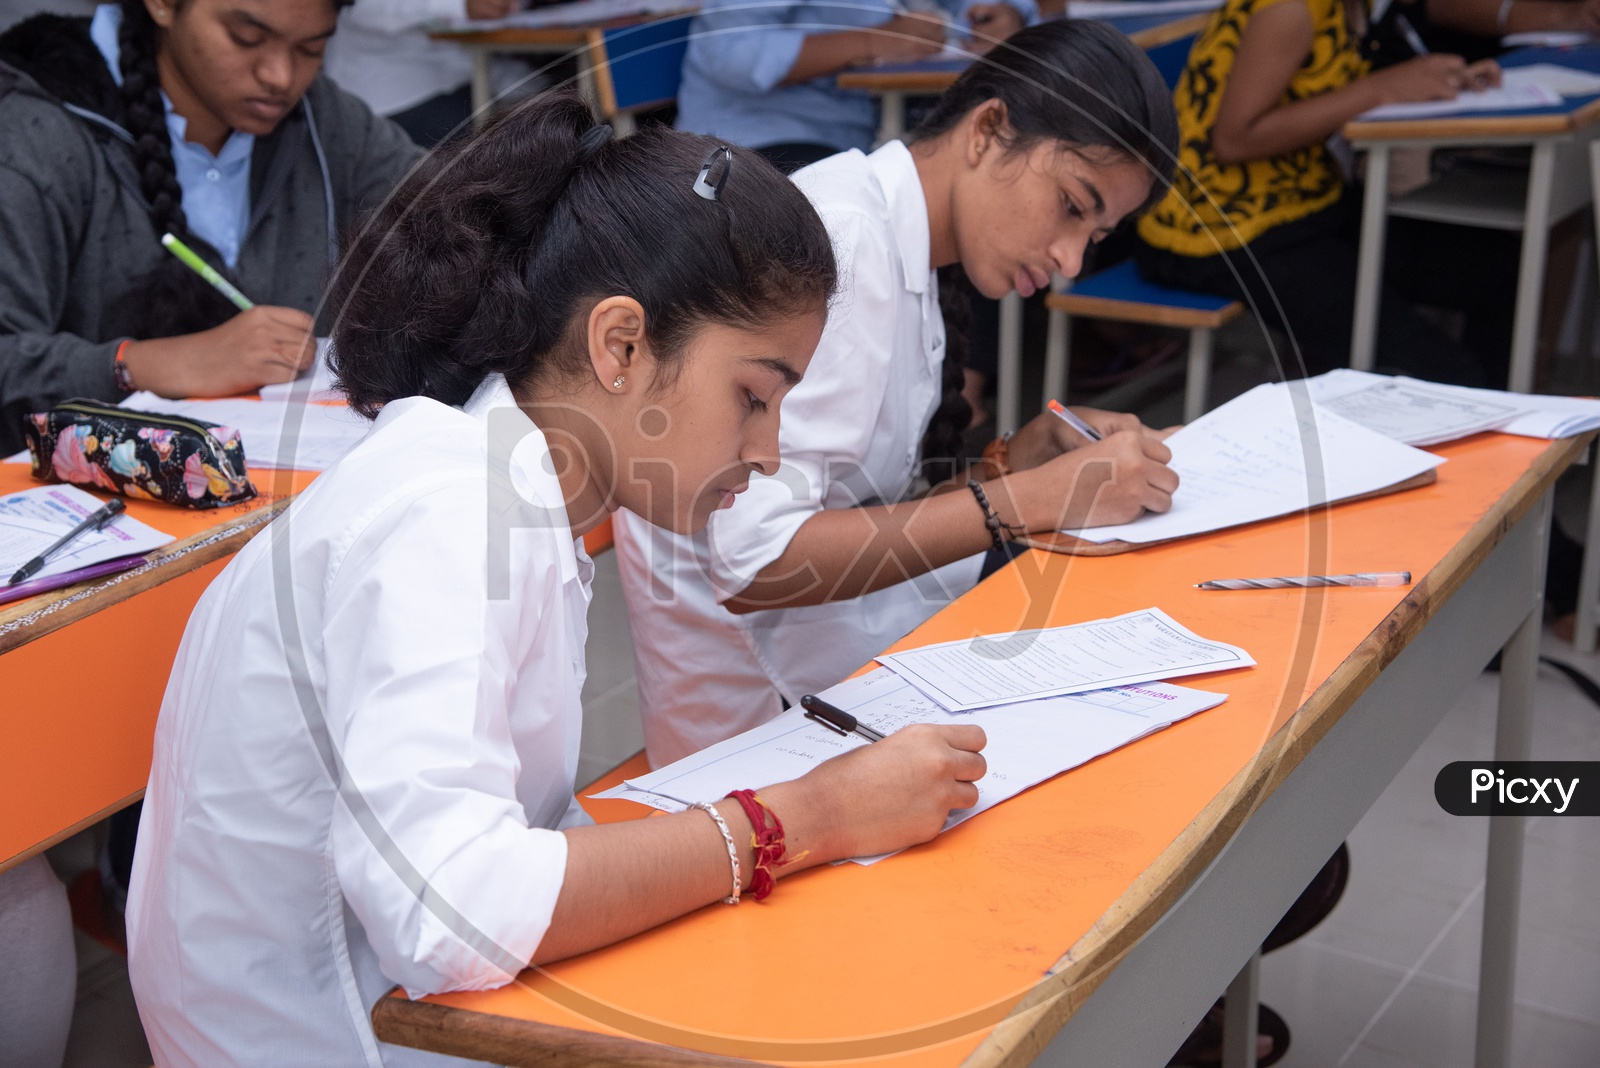 Girl student writing exam at an educational institute.